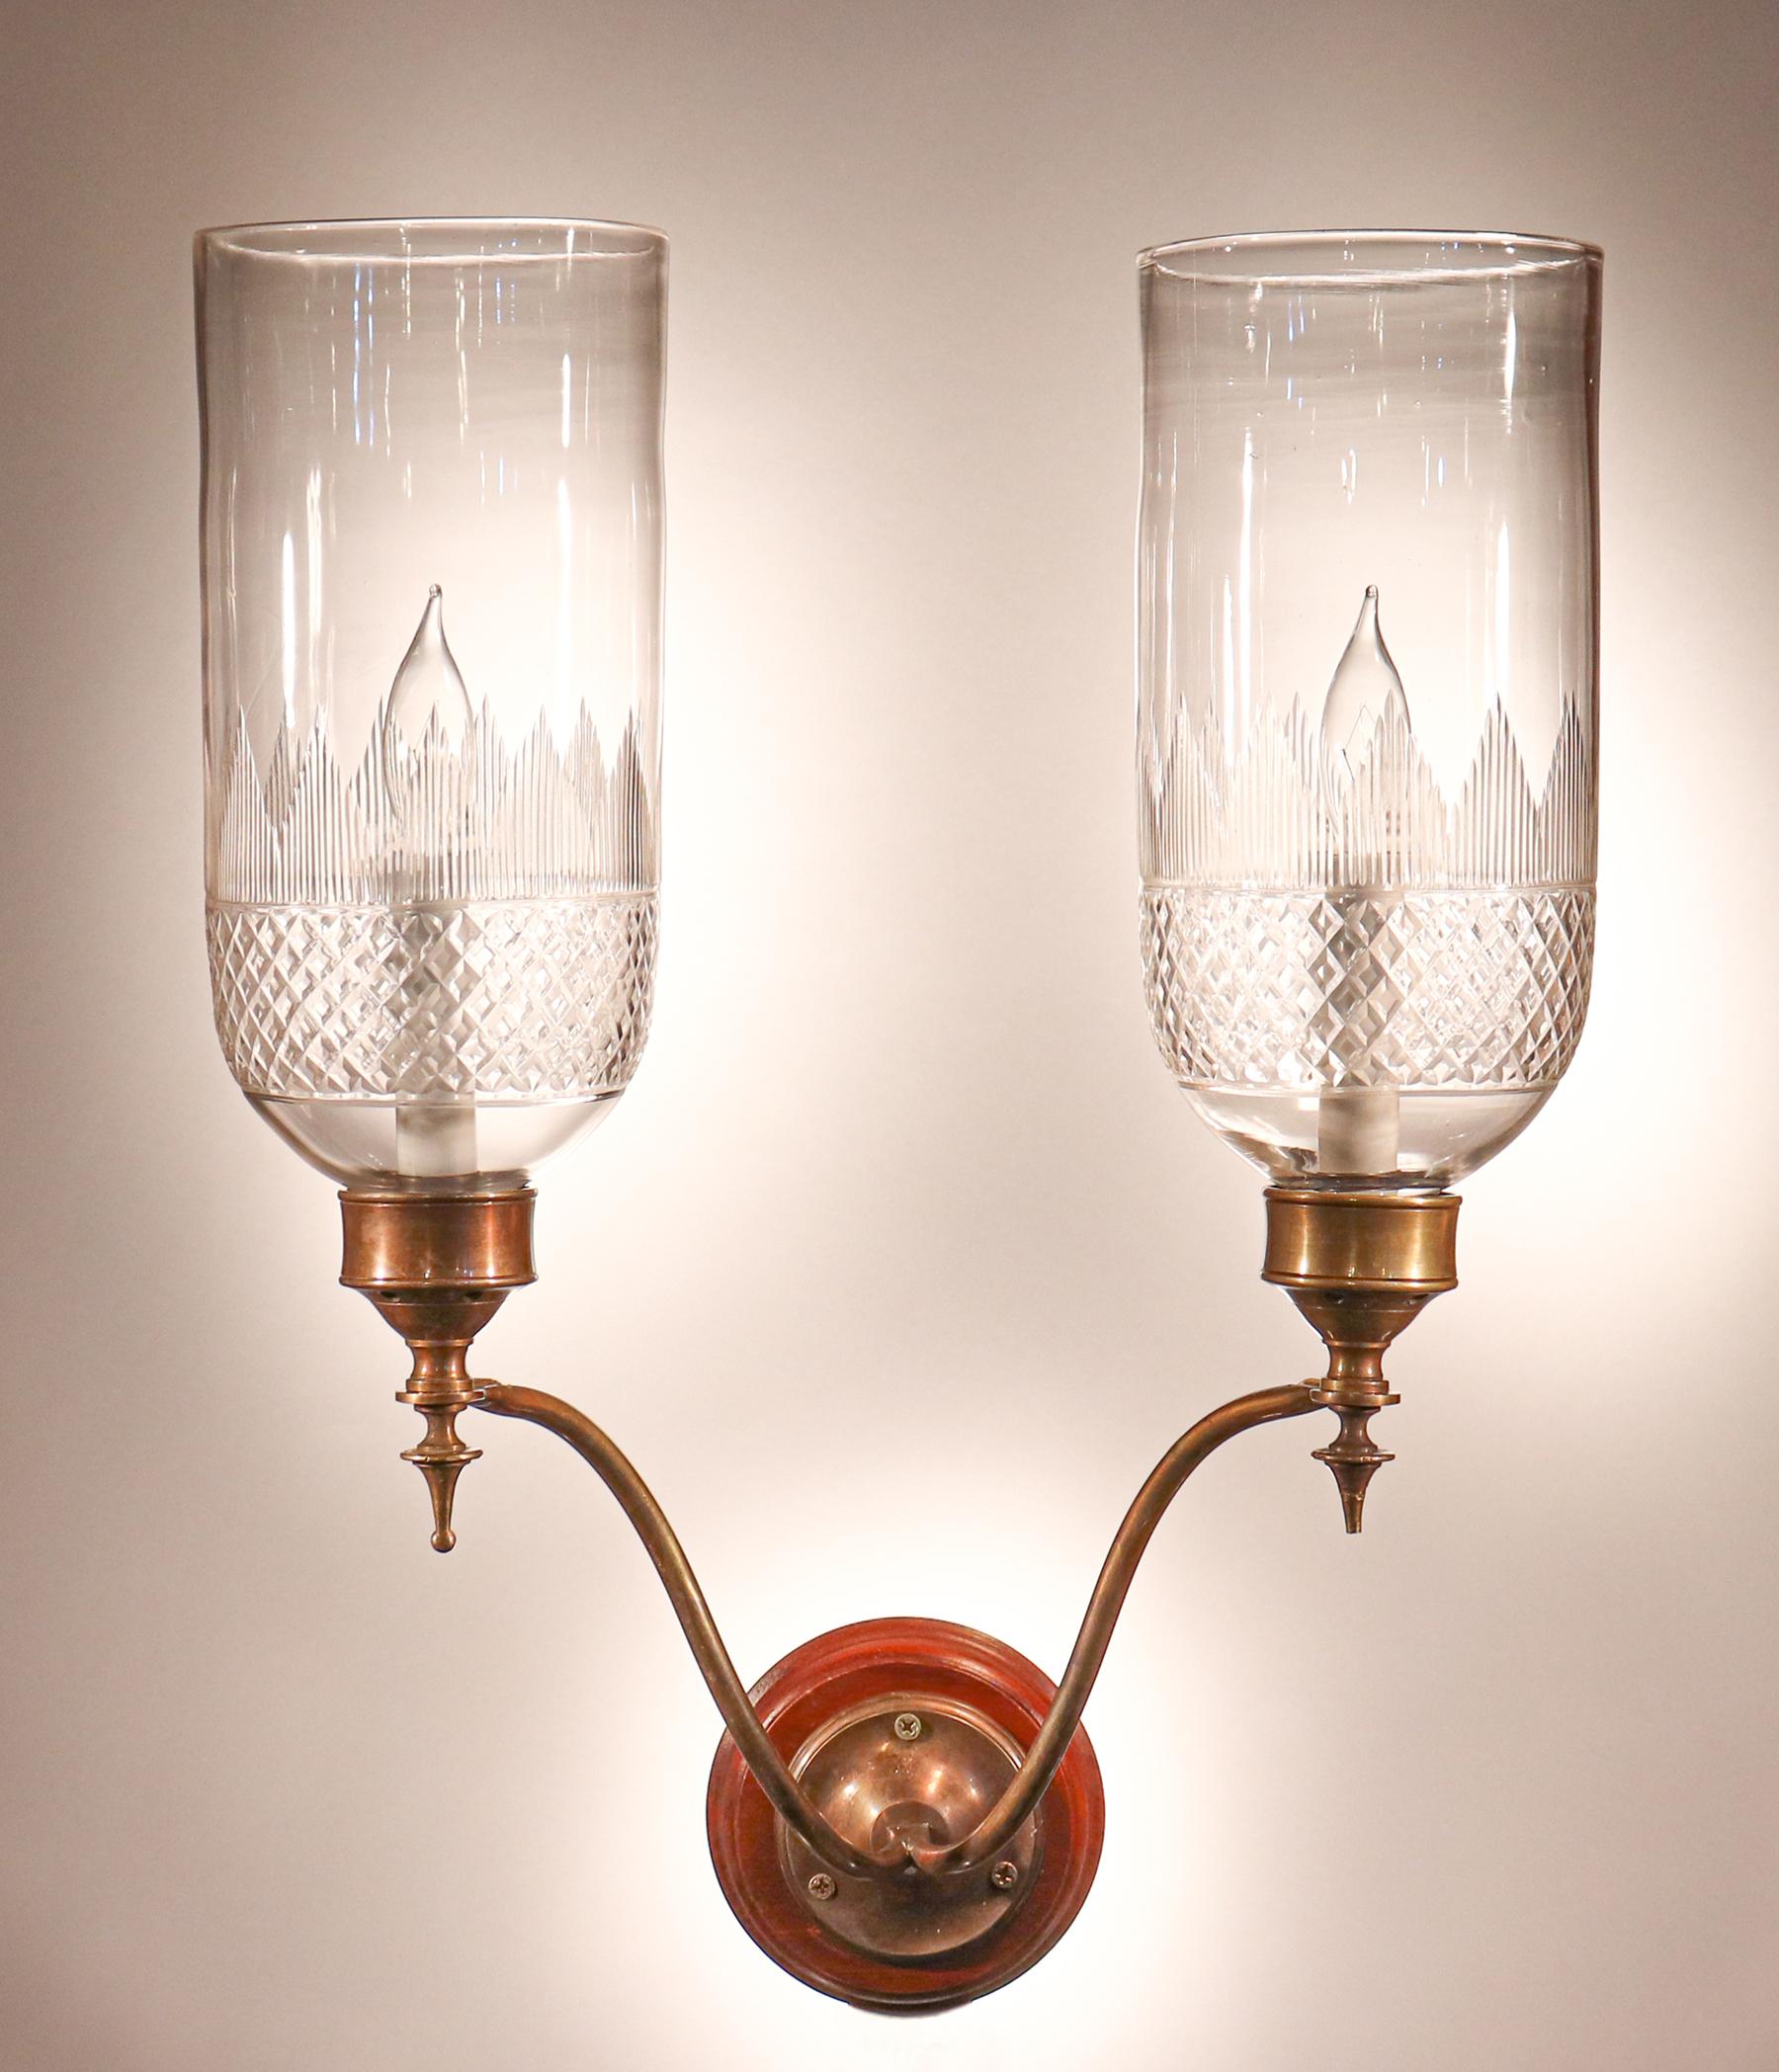 Etched Pair of 19th Century Hurricane Shade Double-Arm Wall Sconces